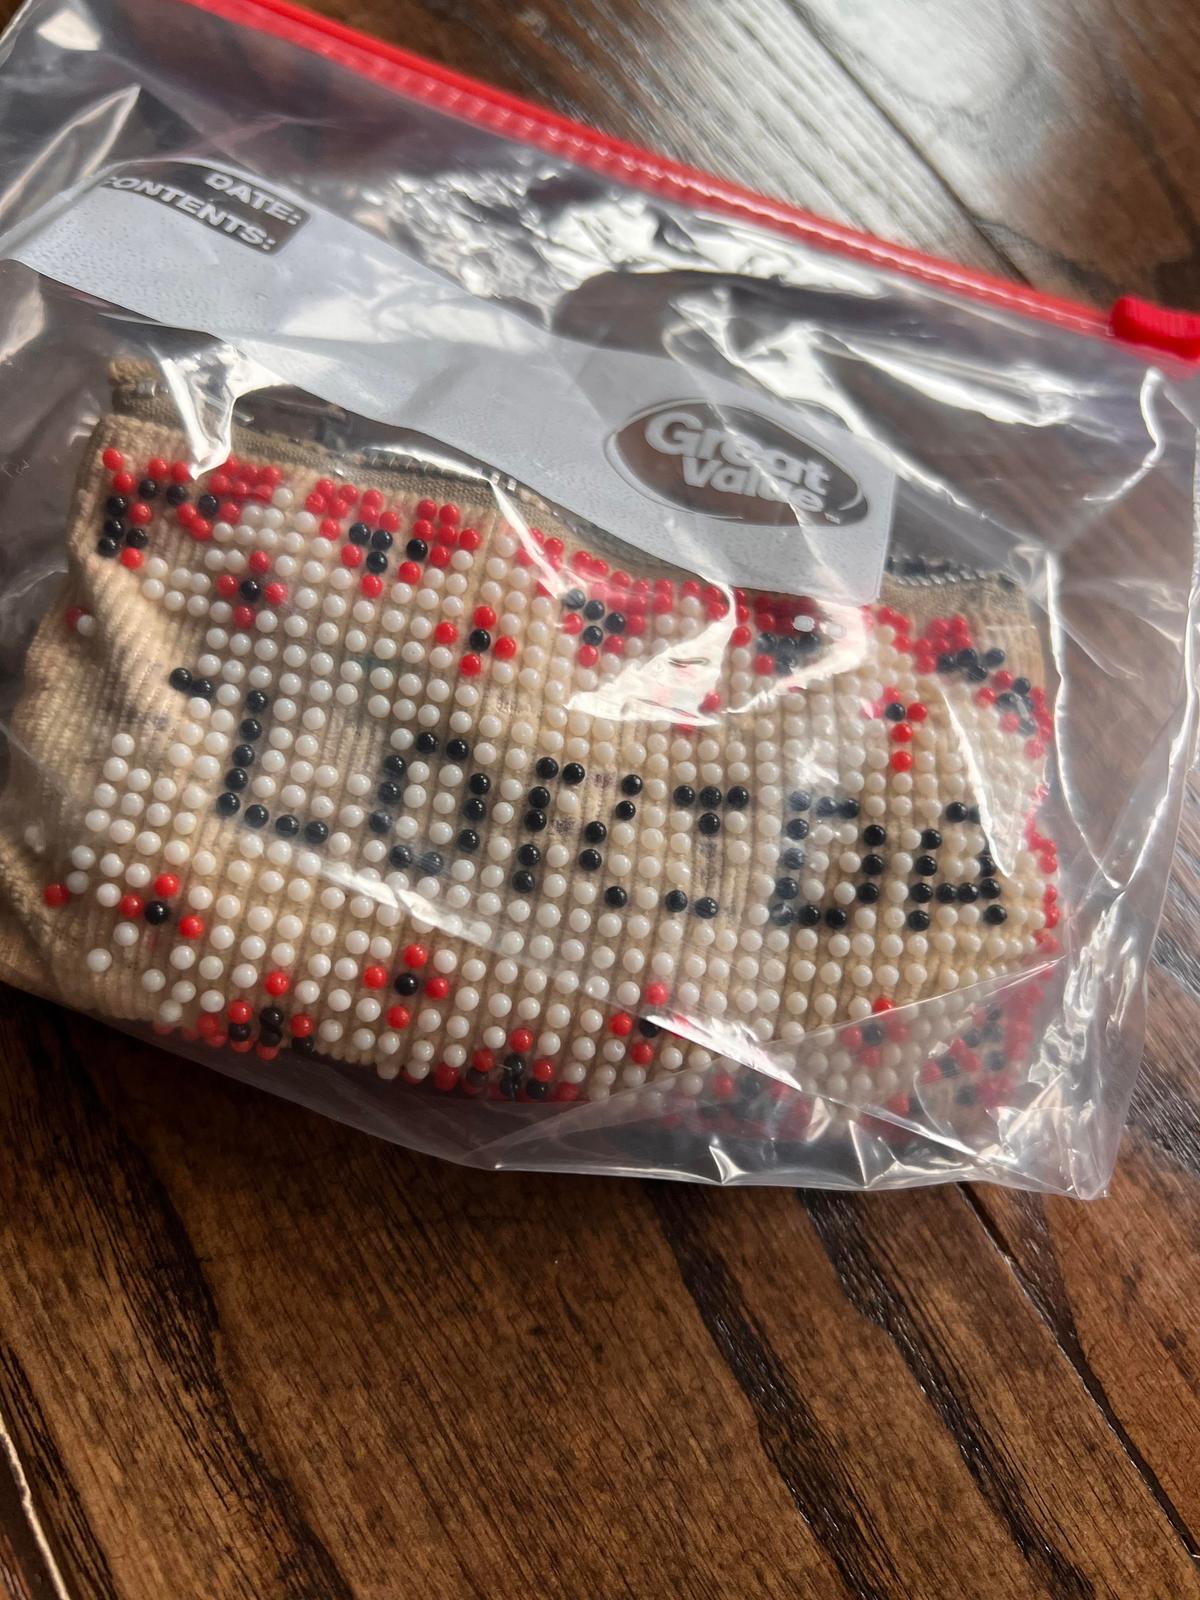 The embroidered pouch was found in the donated jacket by Luke Coelho. (Courtesy of <a href="https://www.facebook.com/tpsmith217">Taryn Patricia</a>)